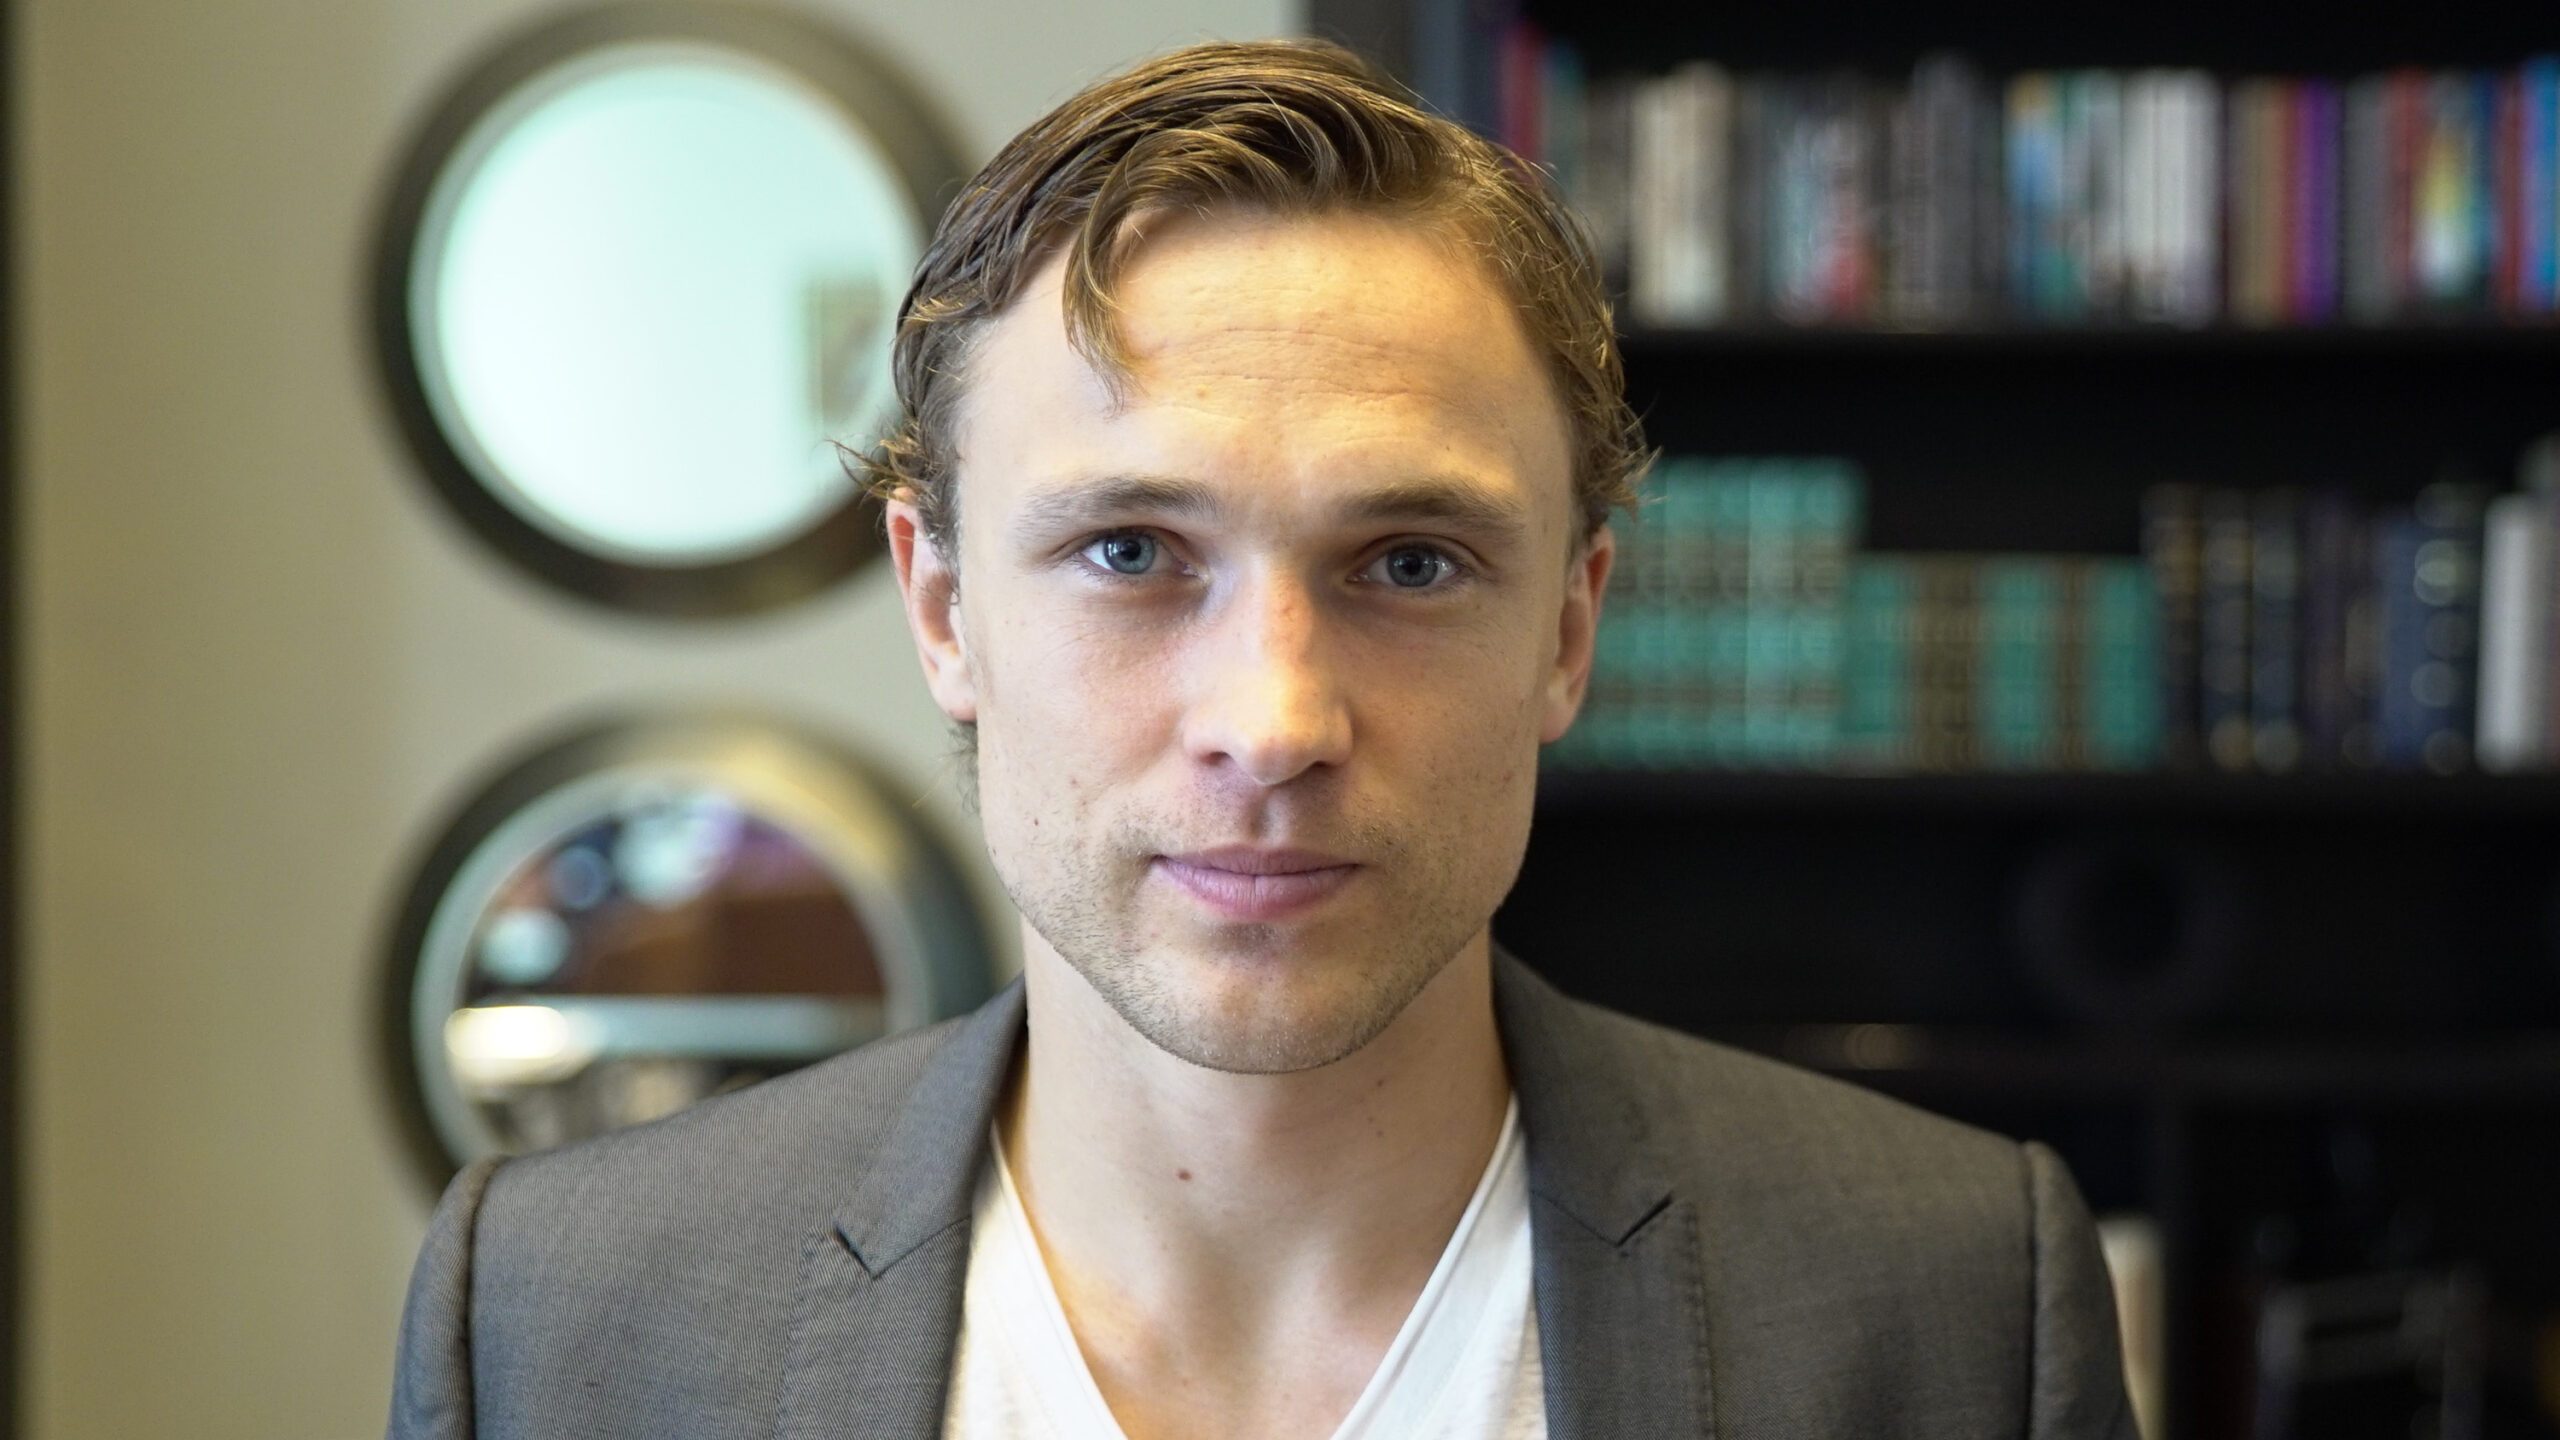 WATCH: William Moseley on crowdfunding and ‘Carrie Pilby’